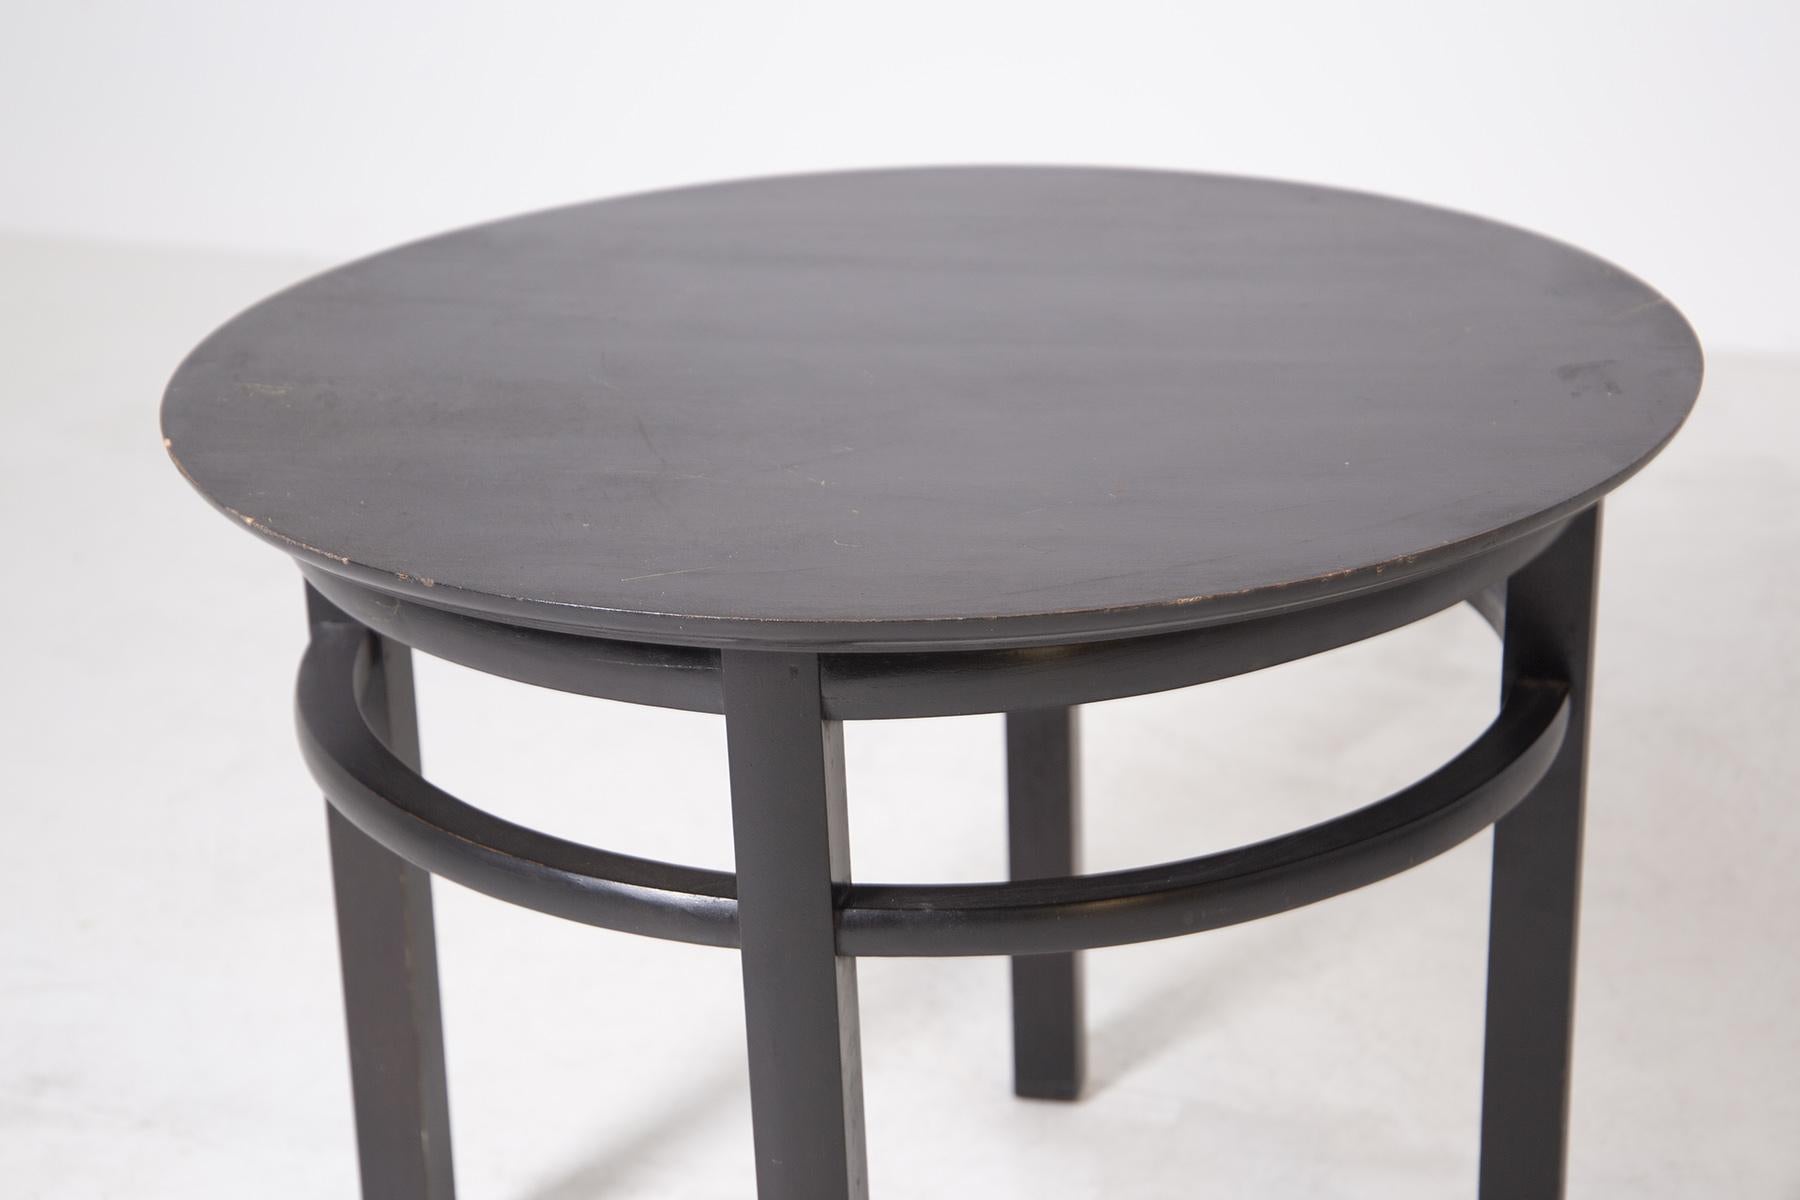 Black painted wood coffee table made by Rob Jhon Gibbings for Widdicomb from the 1950s. The lines are clean and essential.
The coffee table has a round shape with a very elegant black round top.
The supporting legs are 4 and have a square shape,